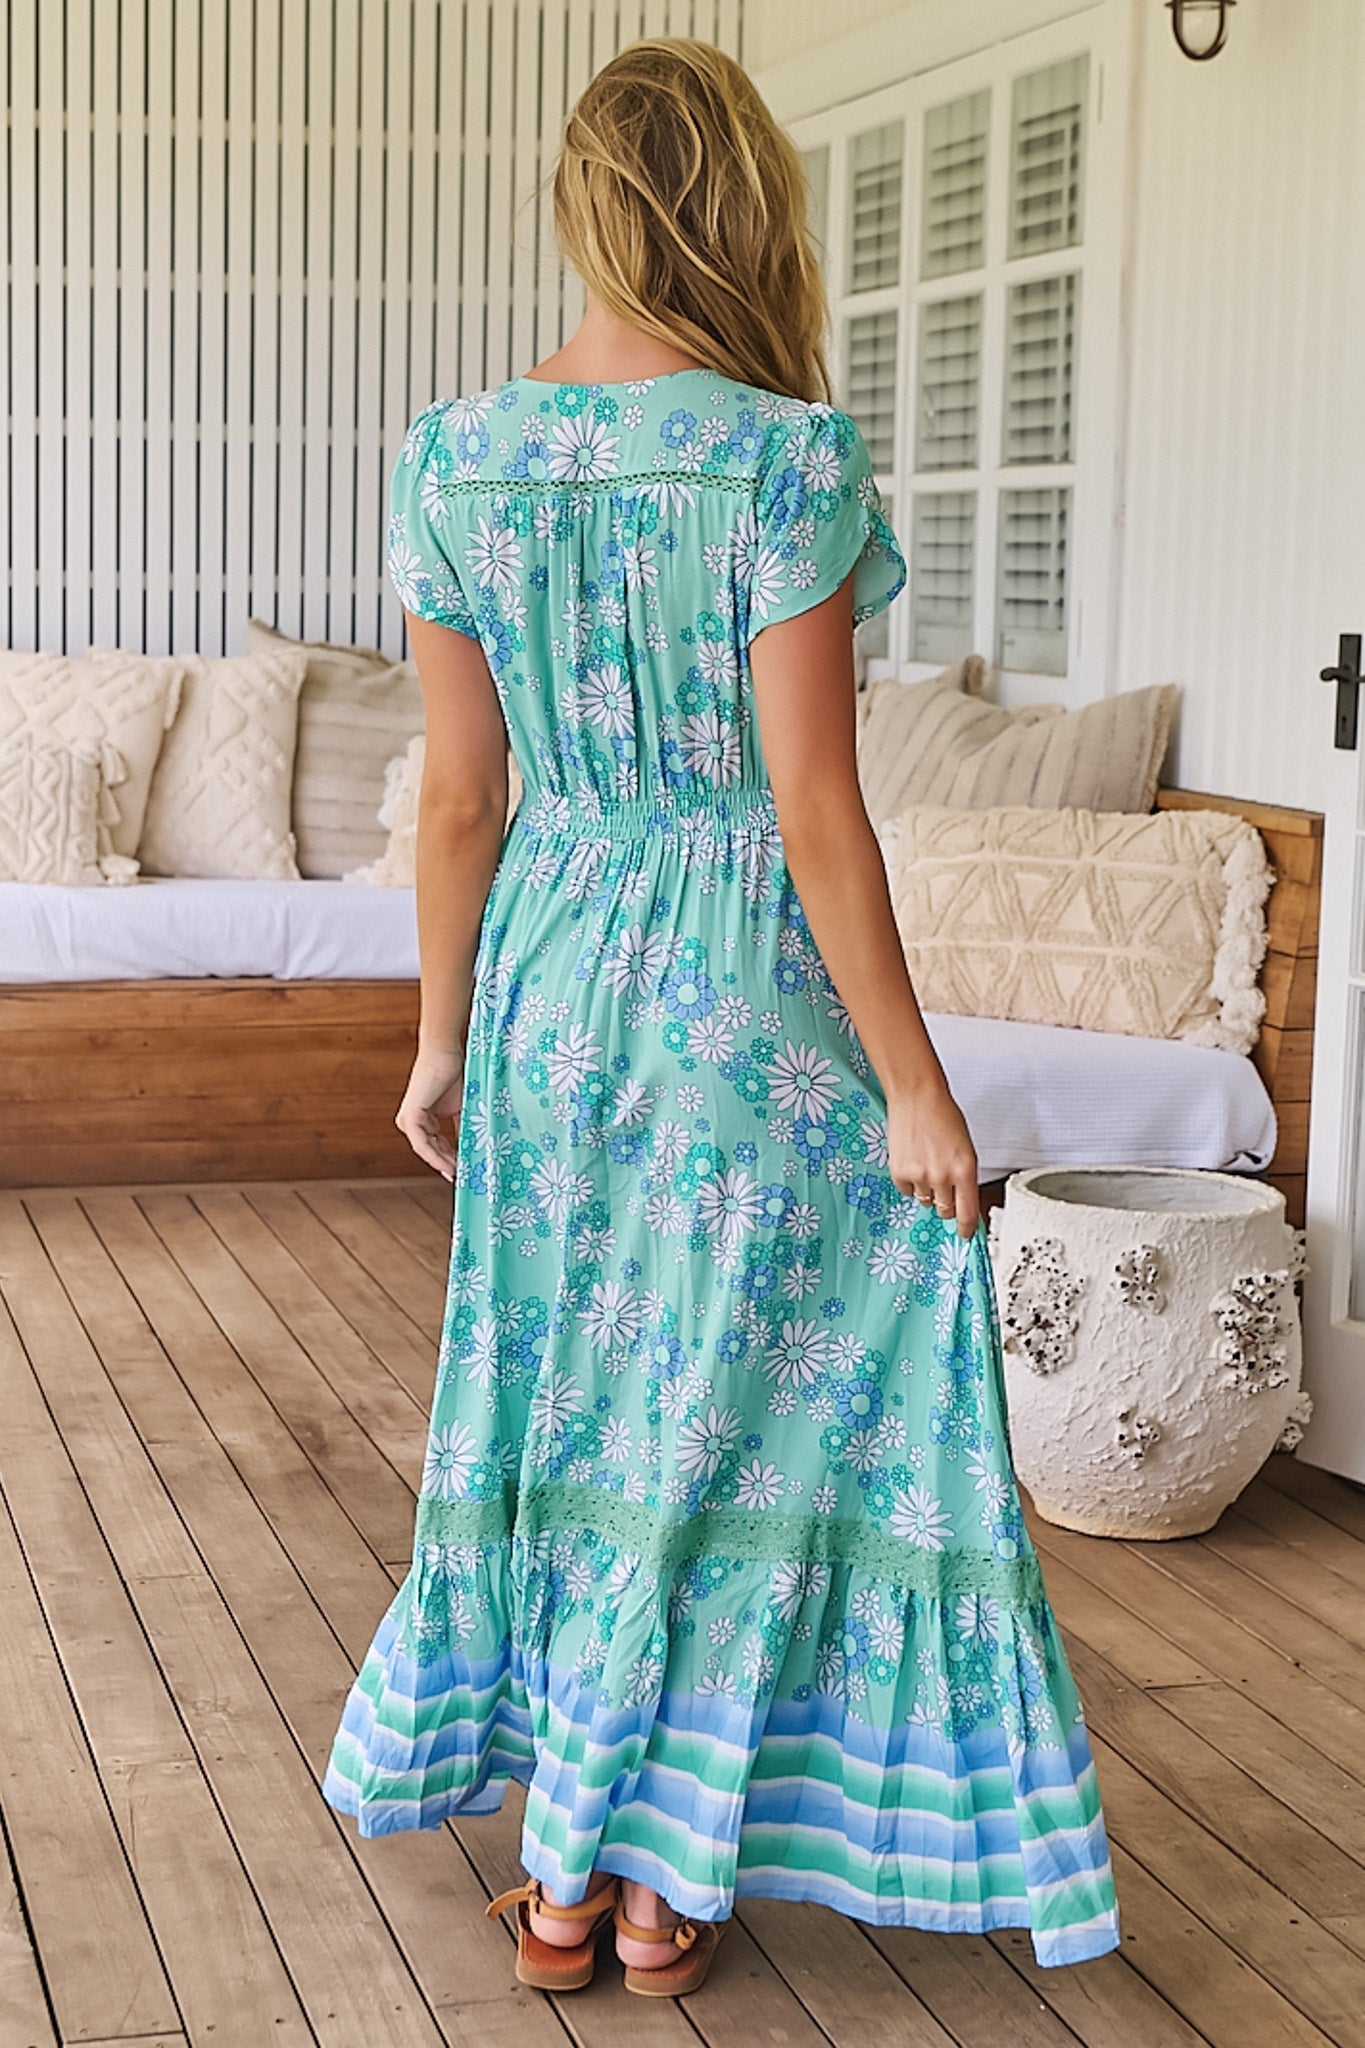 JAASE - Carmen Maxi Dress: Butterfly Cap Sleeve Button Down A Line Dress with Lace Trim in Malina Print